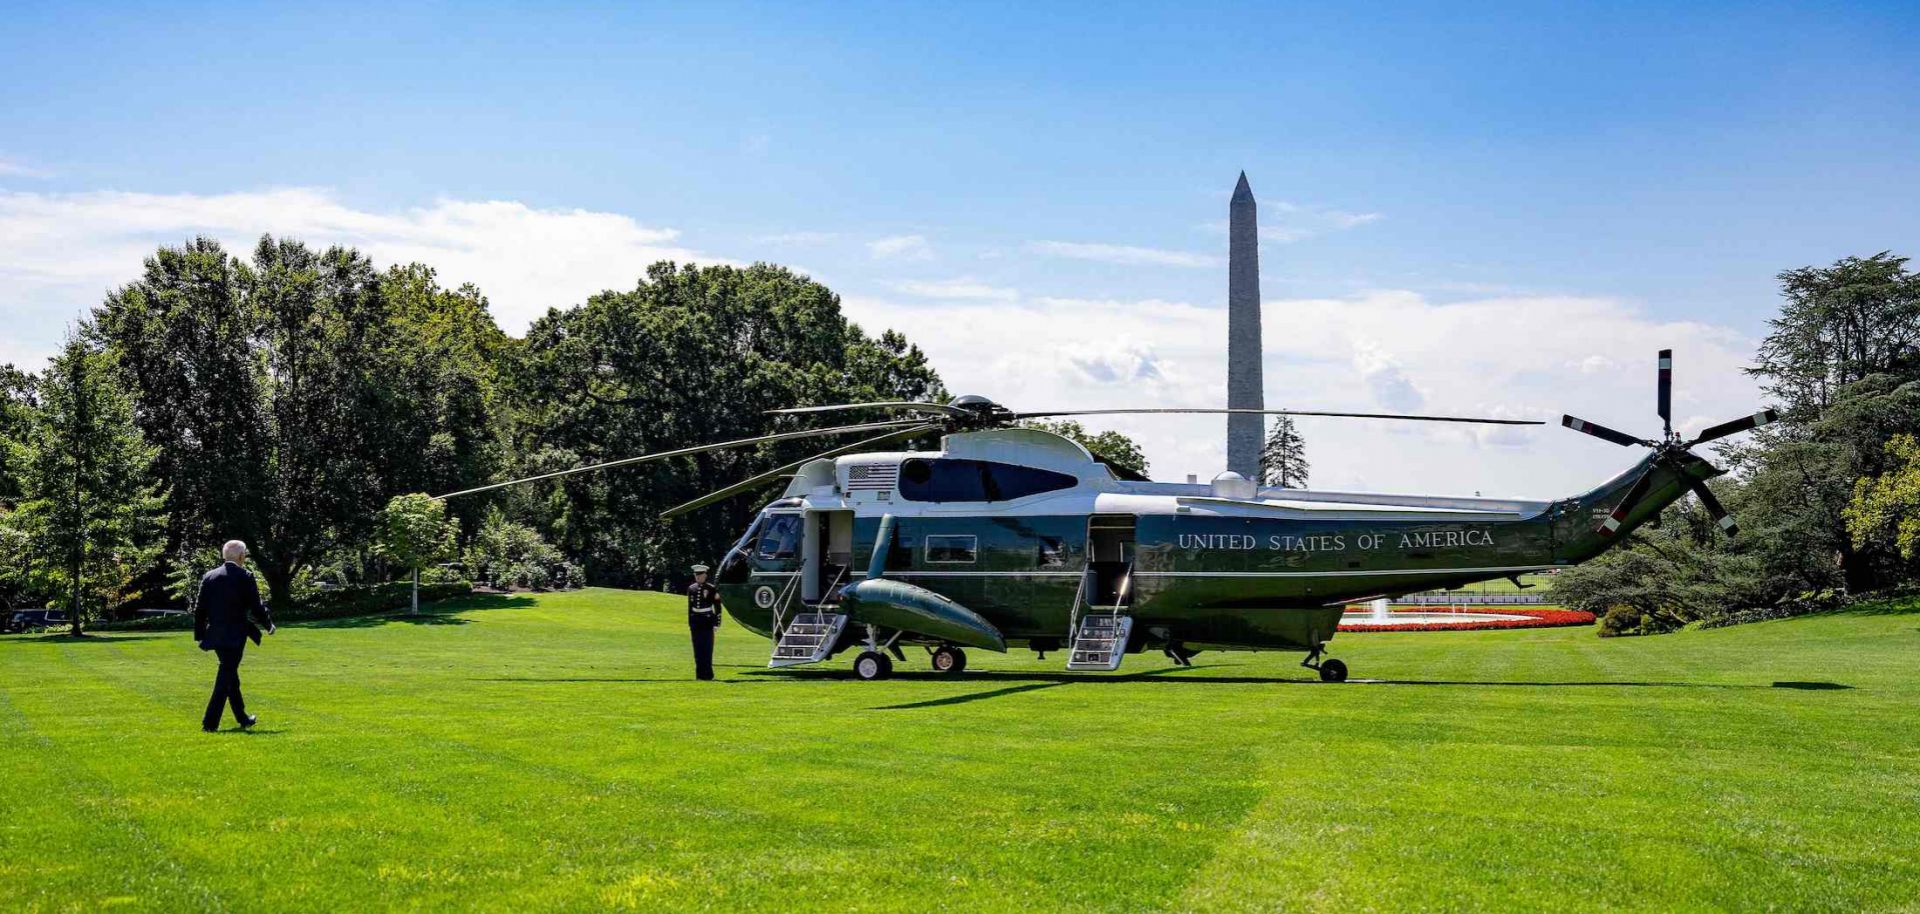 U.S. President Joe Biden boards a helicopter outside the White House in Washington, D.C., on Aug. 17, 2023, as he departs for Camp David in Maryland, where he'll host Japanese Prime Minister Fumio Kishida and South Korean President Yoon Suk Yeol for a trilateral summit.